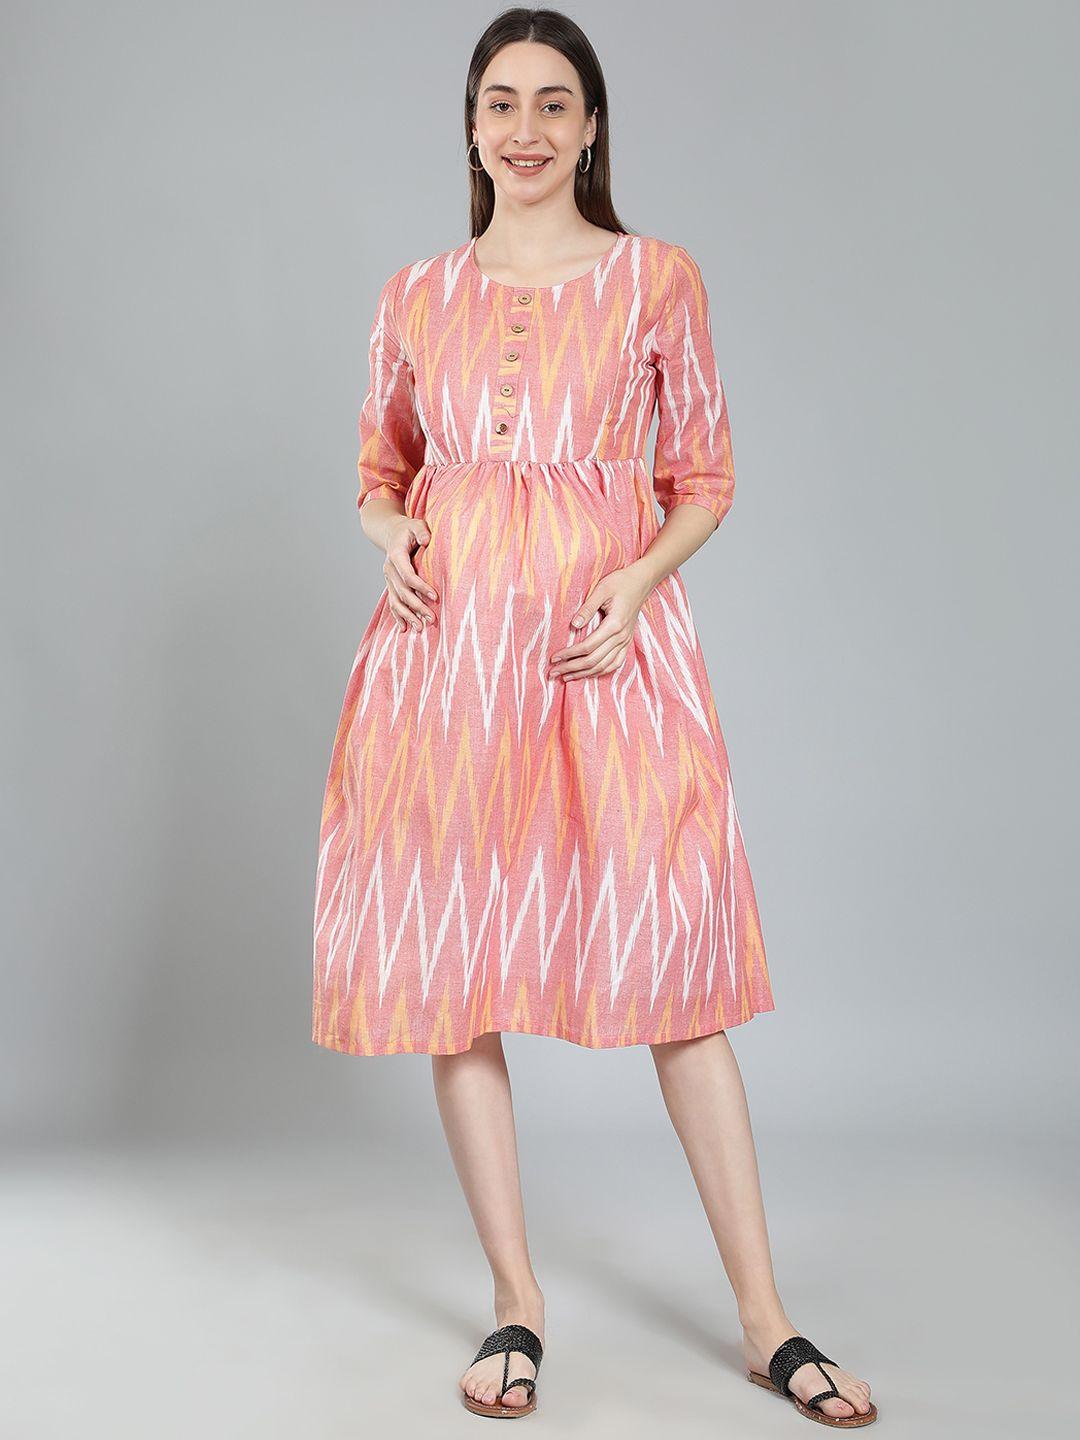 cot'n soft chevron printed maternity fit & flare ethnic dress